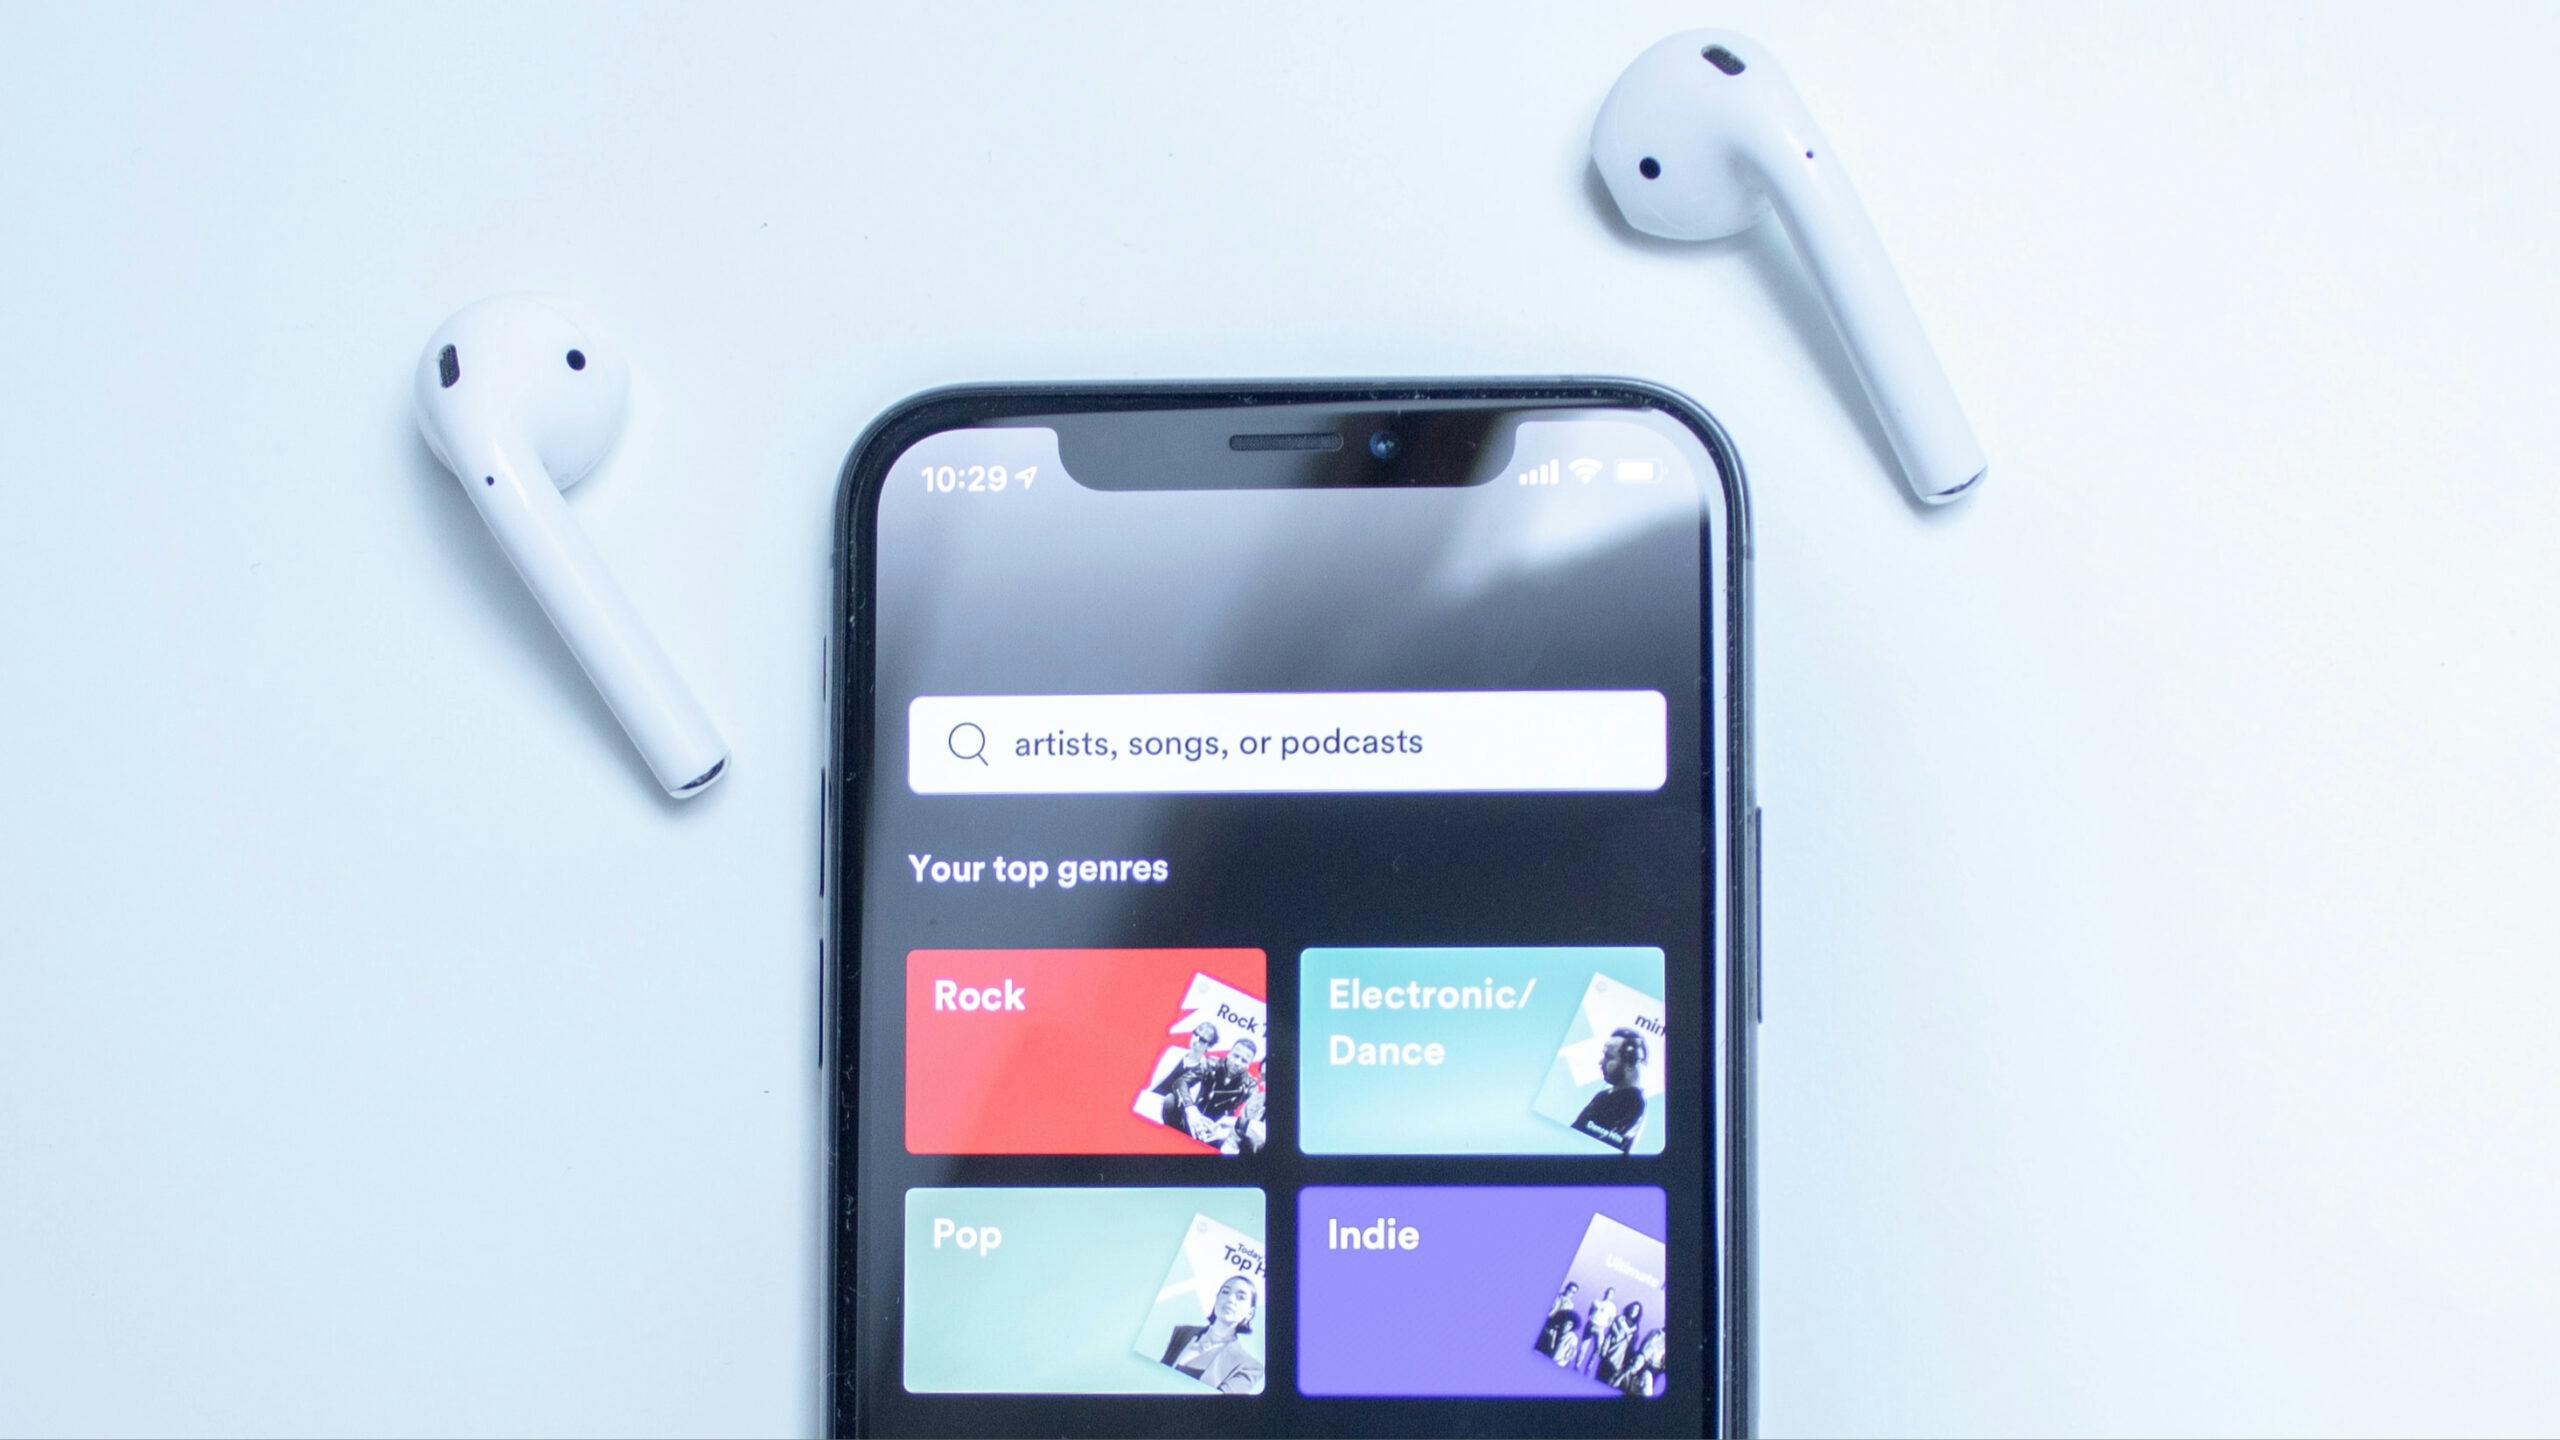 Spotify homescreen with airpods